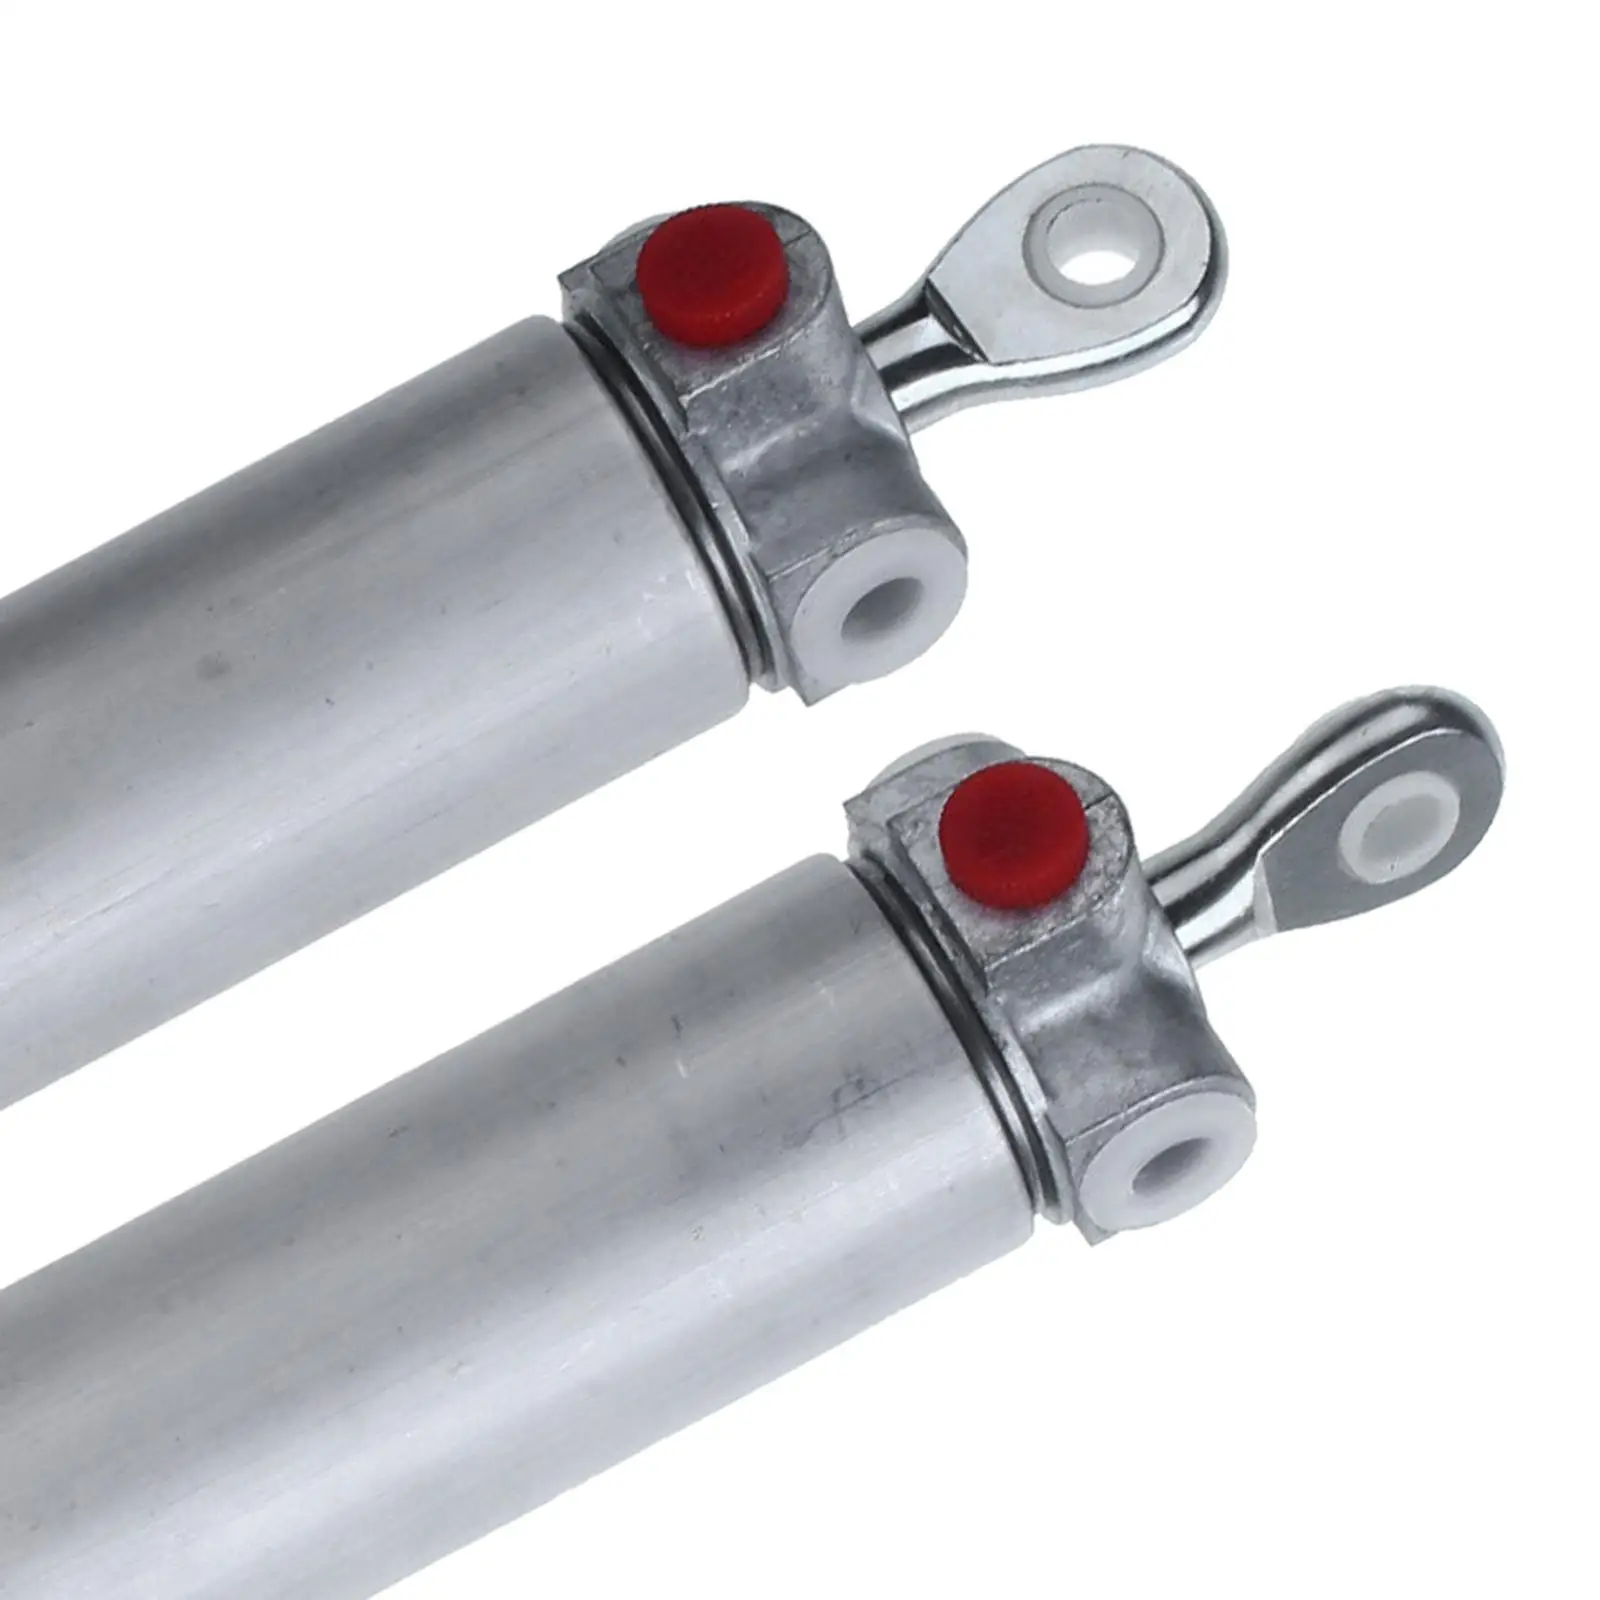 Automobile Convertible Top Hydraulic Cylinders for TC-123 Replacement Convenient Installation